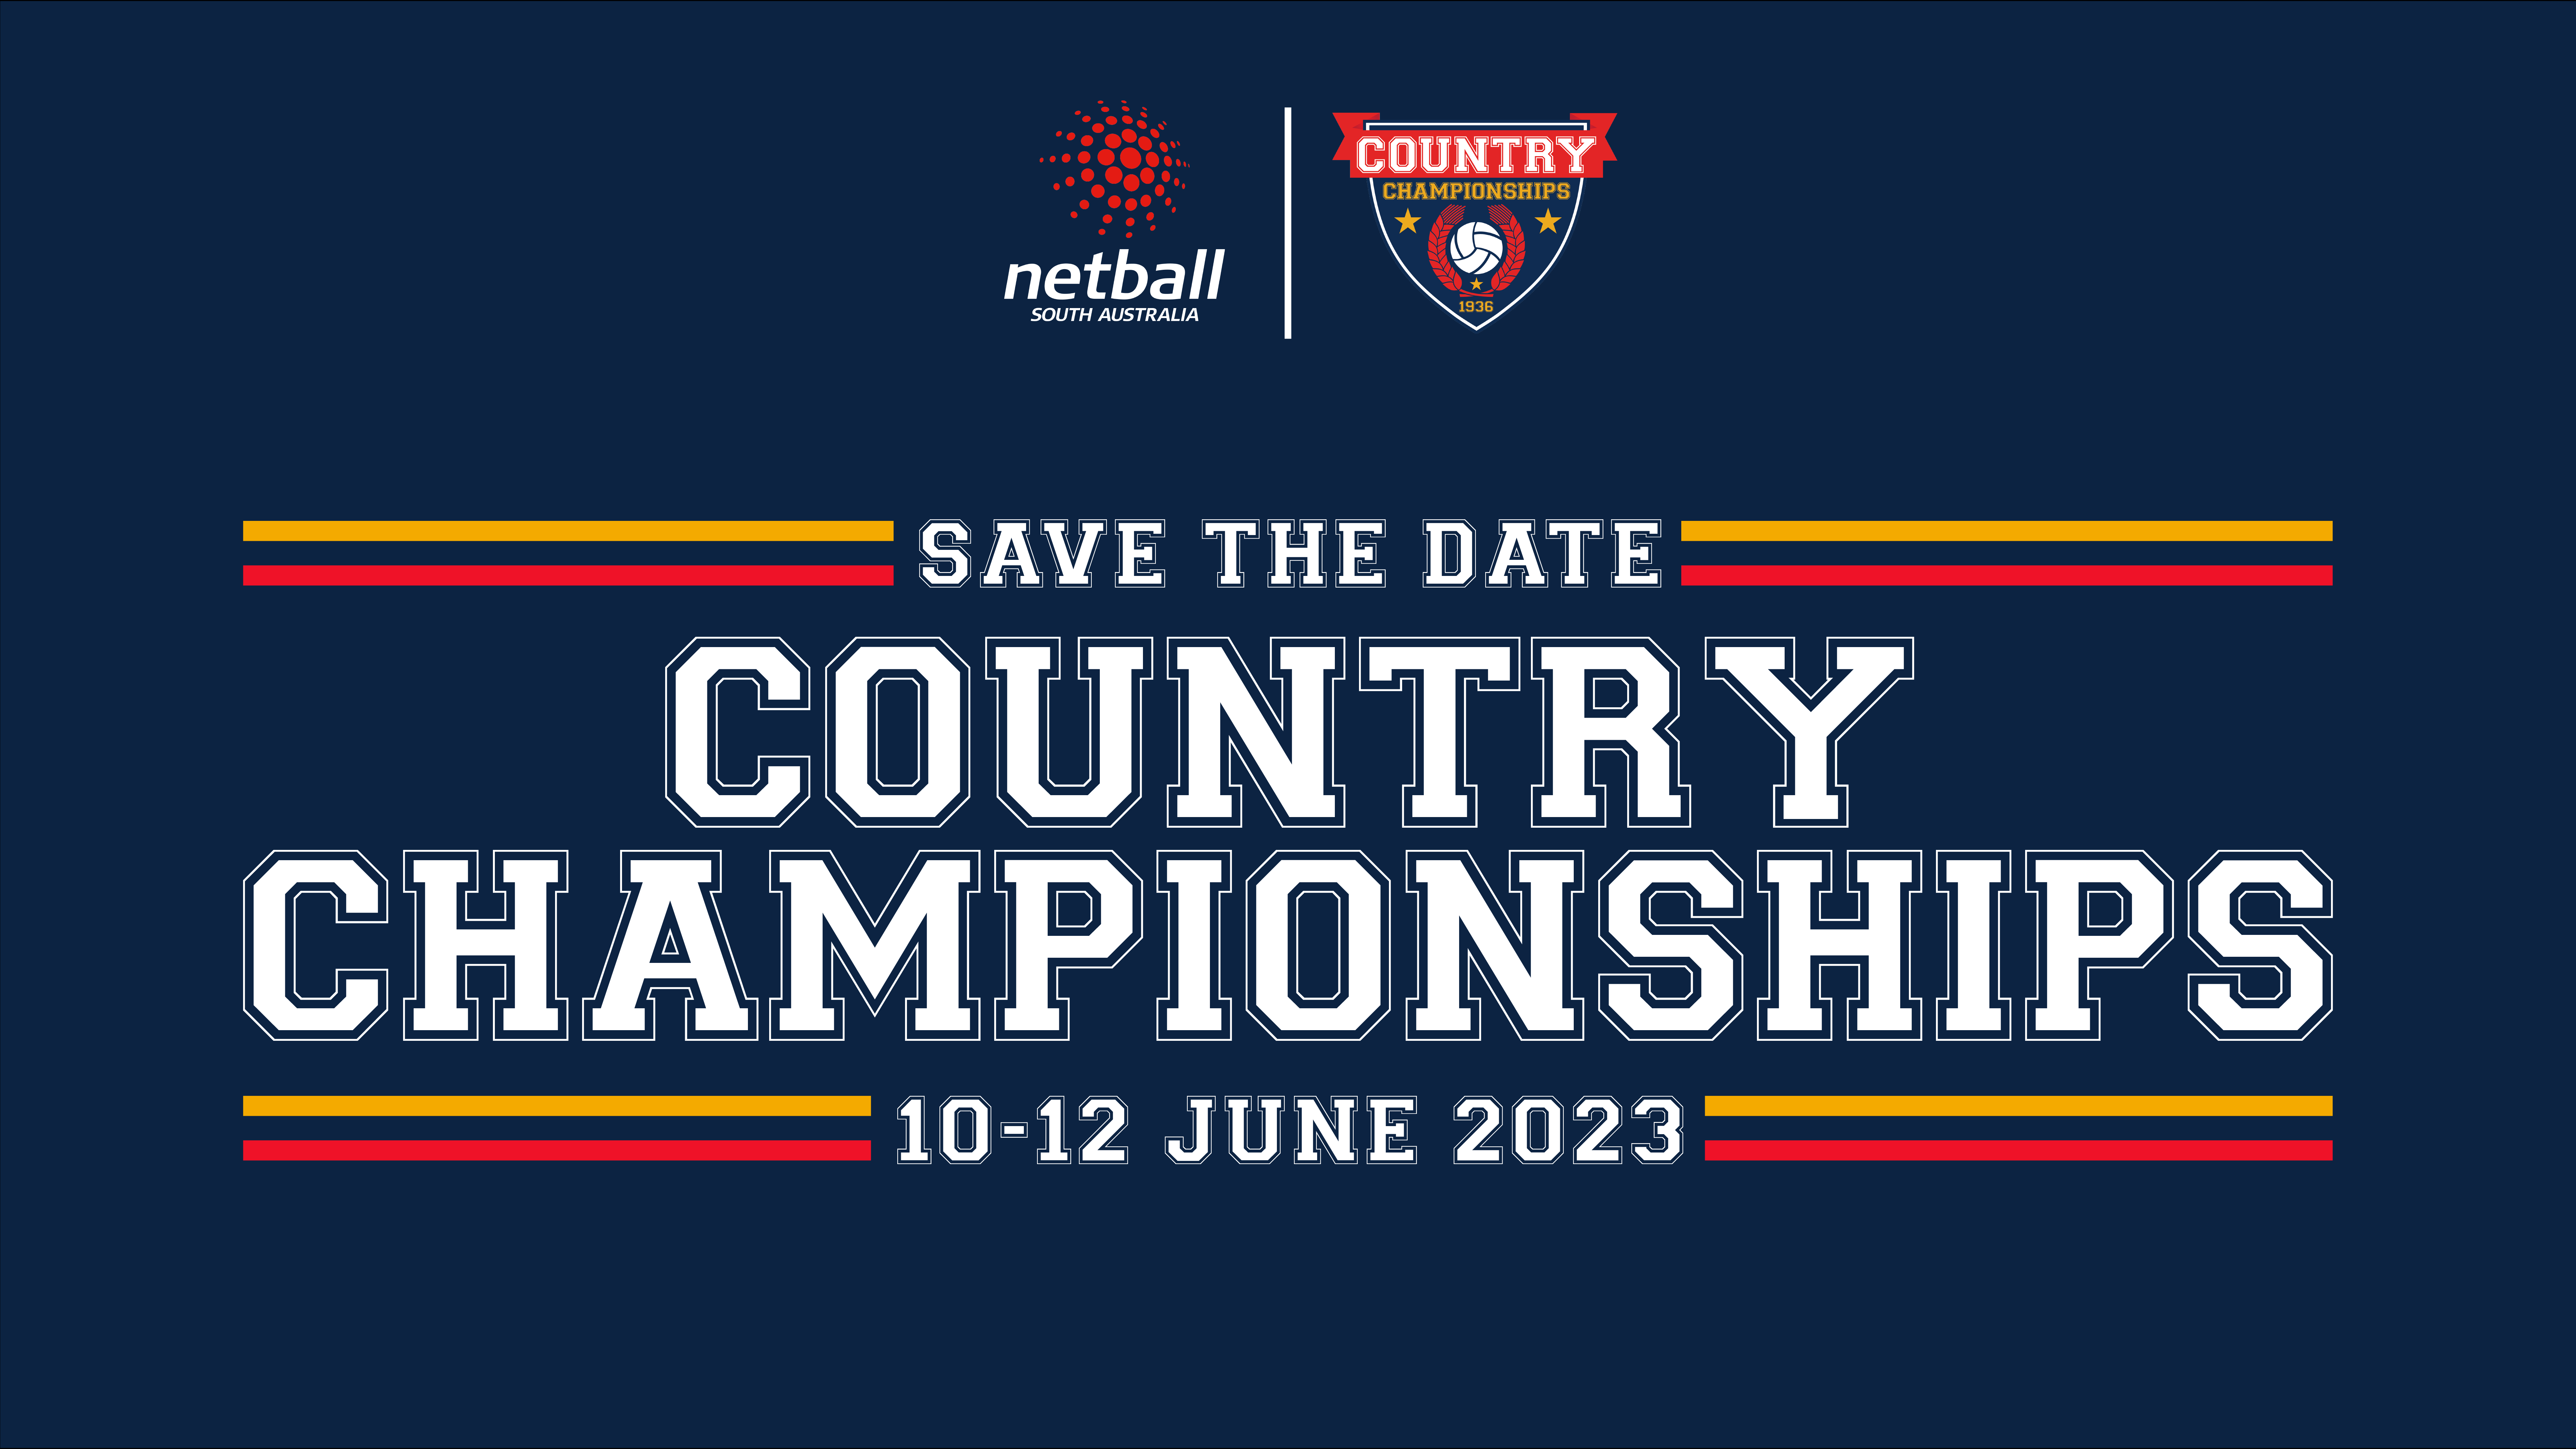 Country Championships